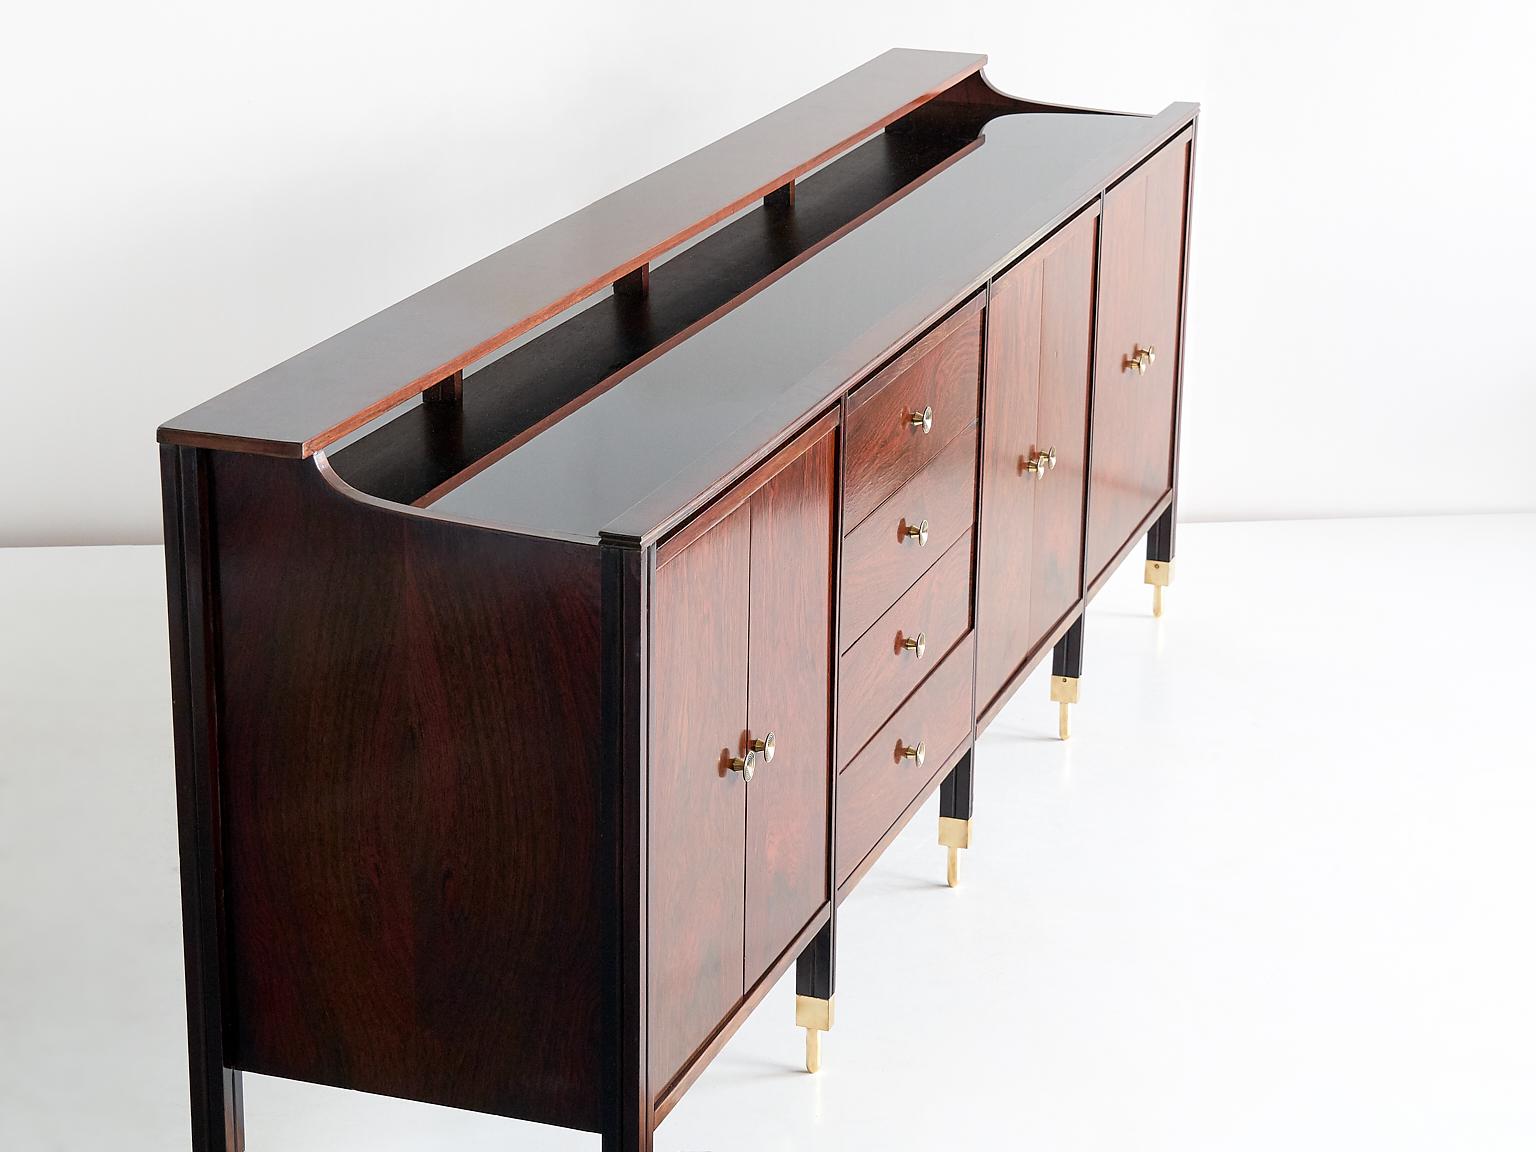 Carlo de Carli Sideboard in Rosewood and Brass for Sormani, Italy, 1964 For Sale 2